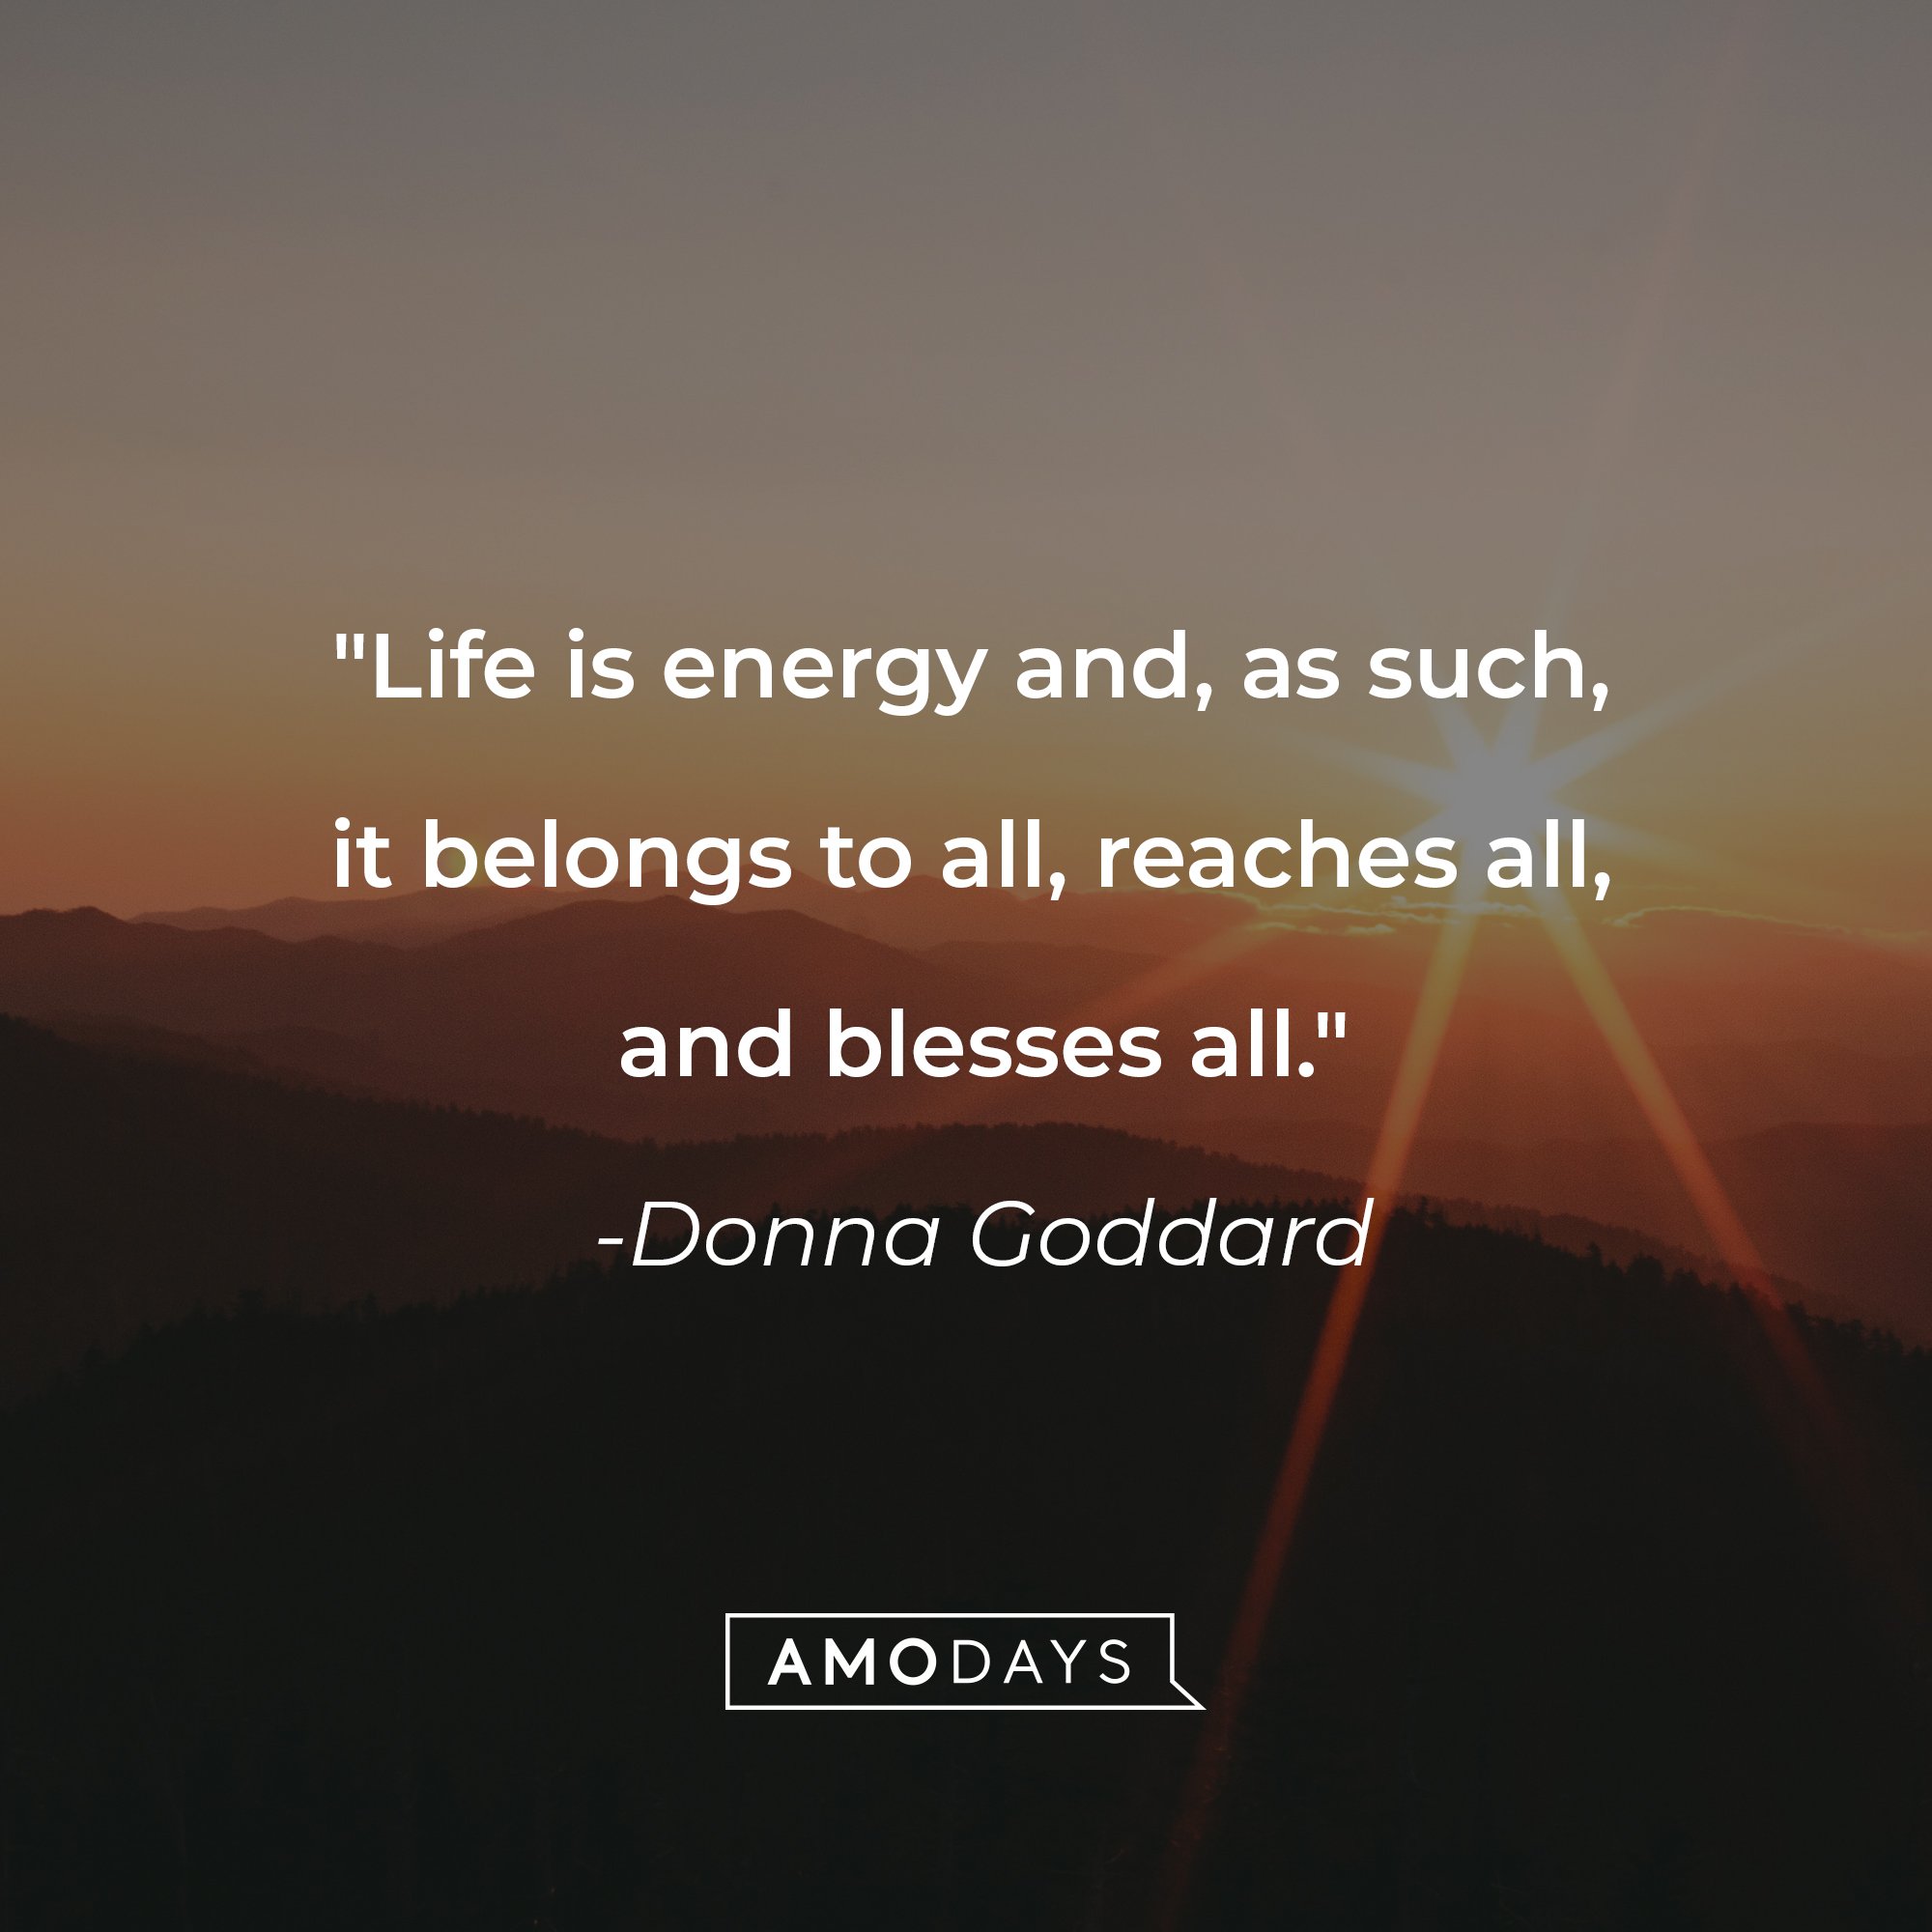 Donna Goddard's quote: "Life is energy and, as such, it belongs to all, reaches all, and blesses all." | Image: AmoDays